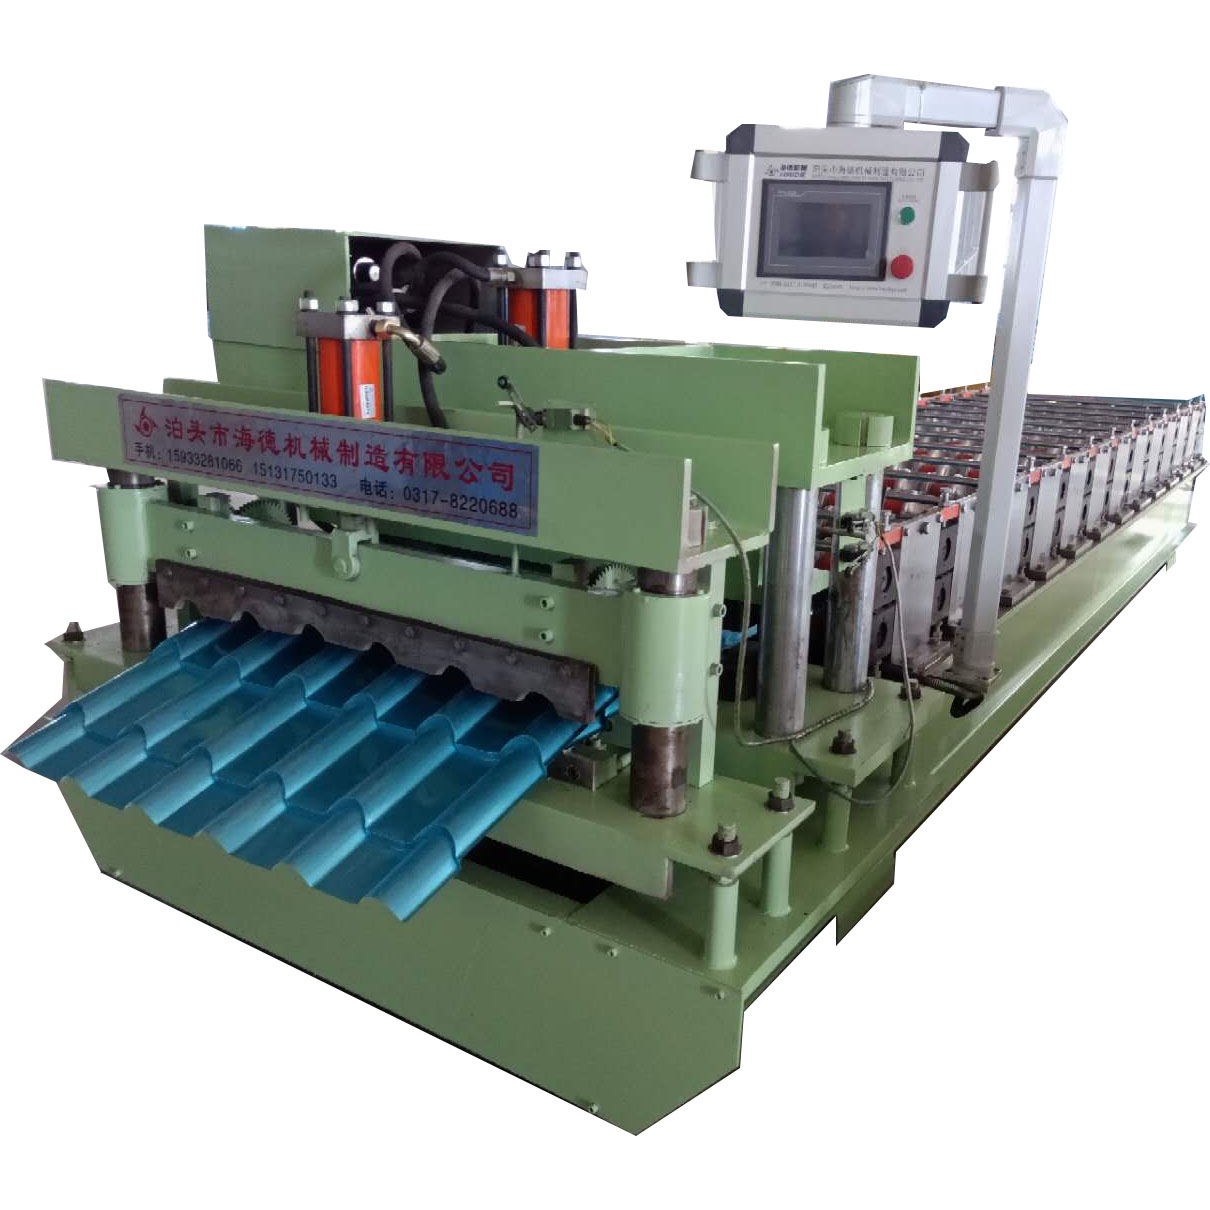 ibr corrugated roof sheet roofing glazed tiles roll forming making machine